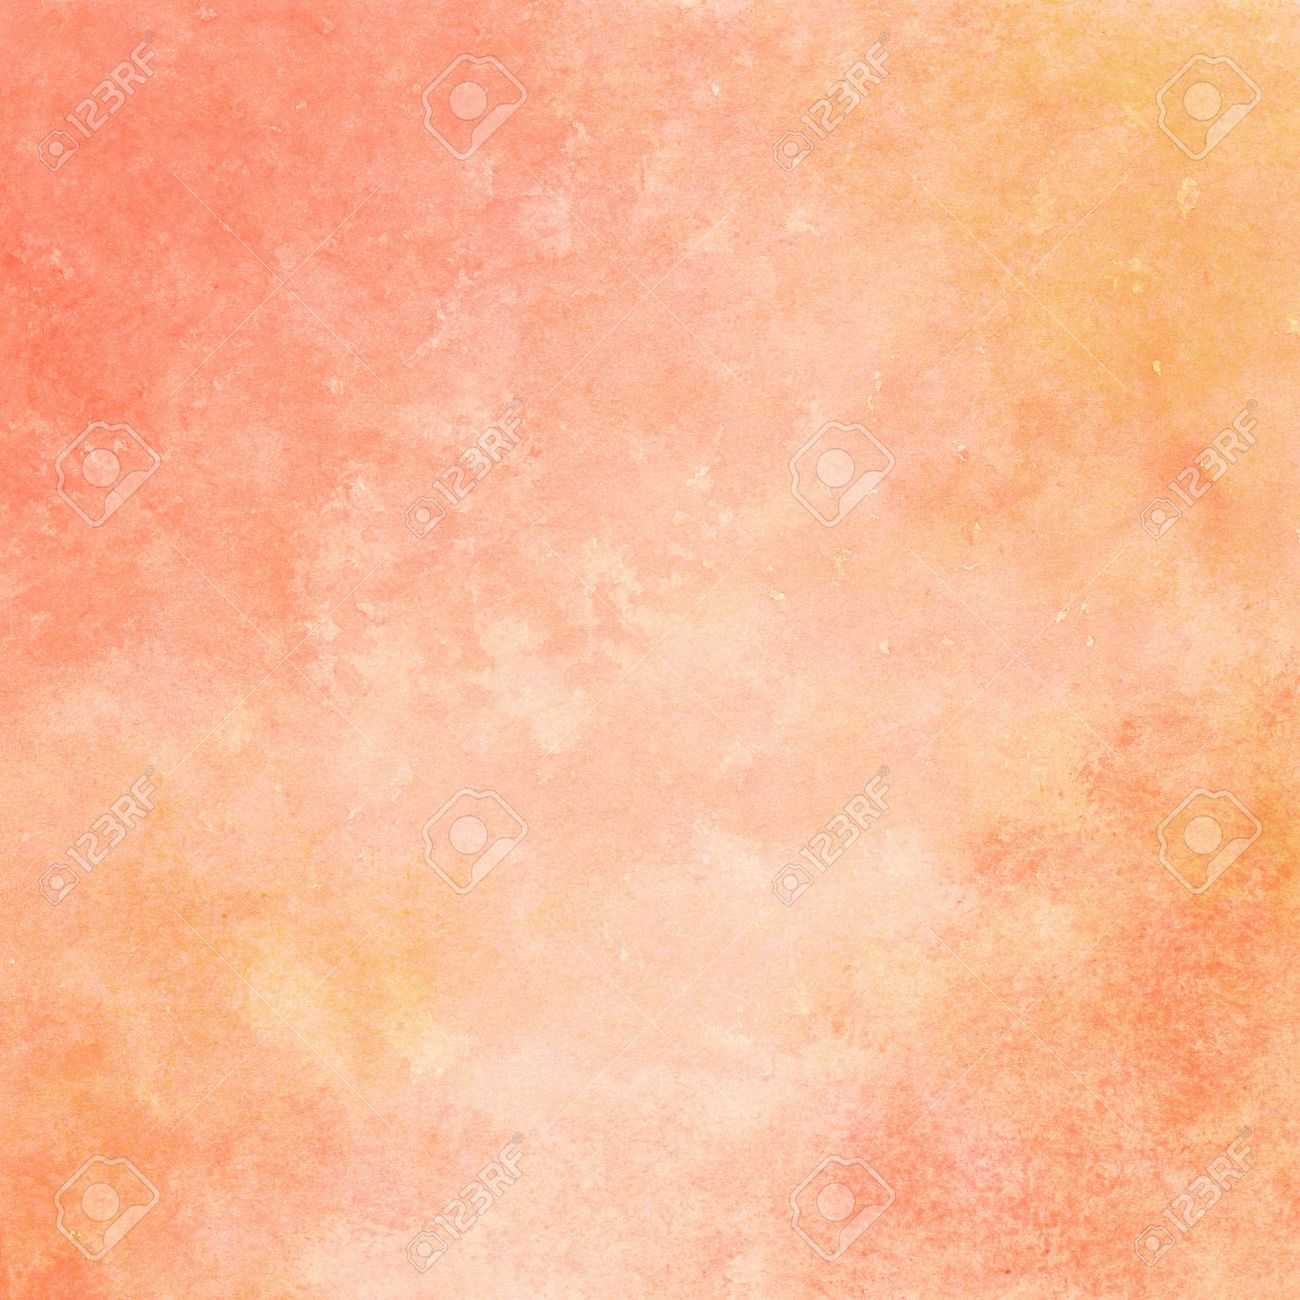 Peach And Orange Watercolor Texture Background Hand Painted Stock